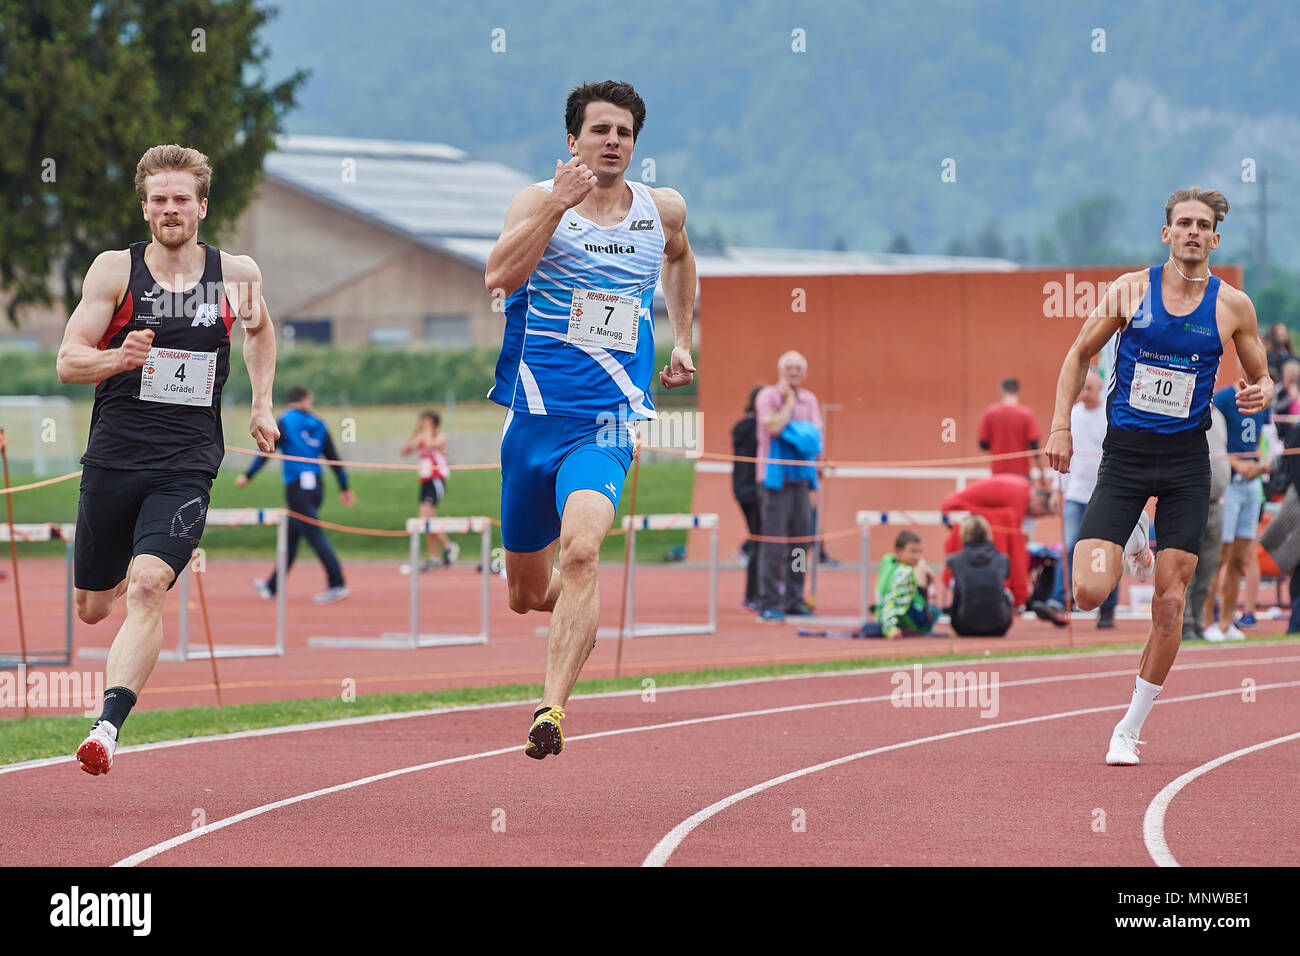 Landquart, Switzerland. May 19, 2018. Julian Grädel BTV Aarau Athletics,  Fabian Marugg Leichtathletik Club Zürich and Matthias Steinmann LV Frenke  during the 400 meters competition at the athletics combined events meeting  in